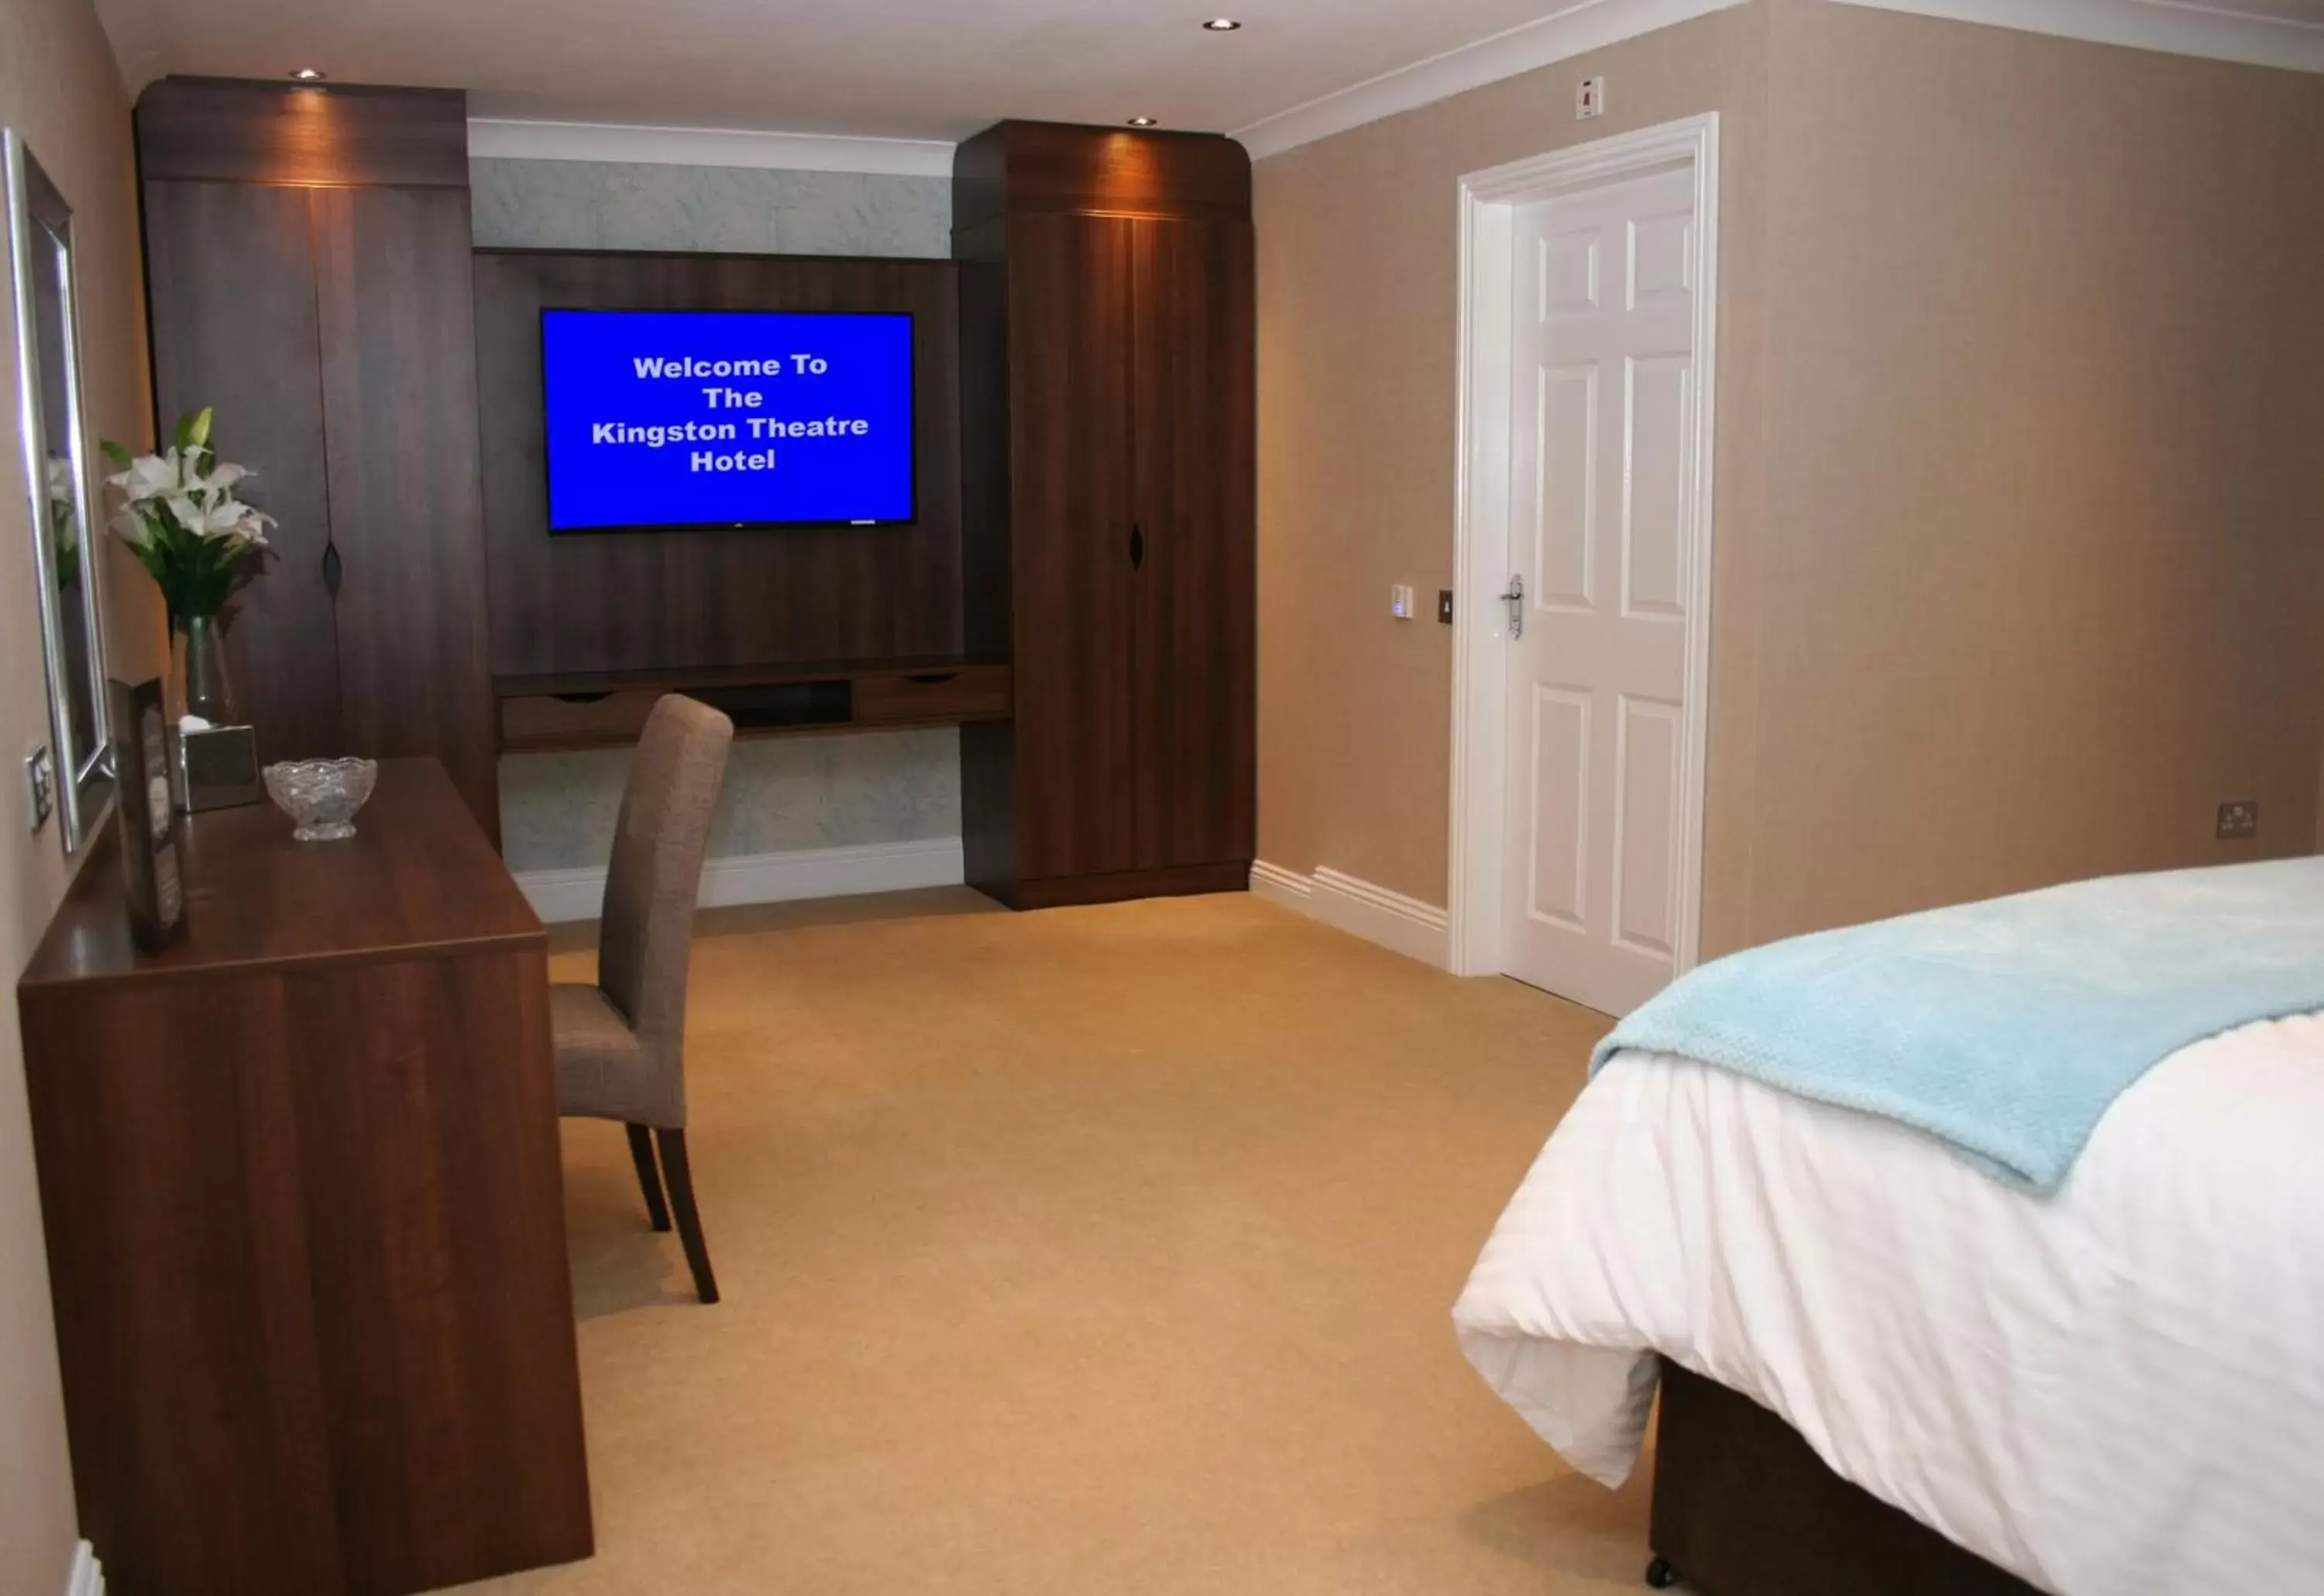 Bed, TV/Entertainment Center in Kingston Theatre Hotel